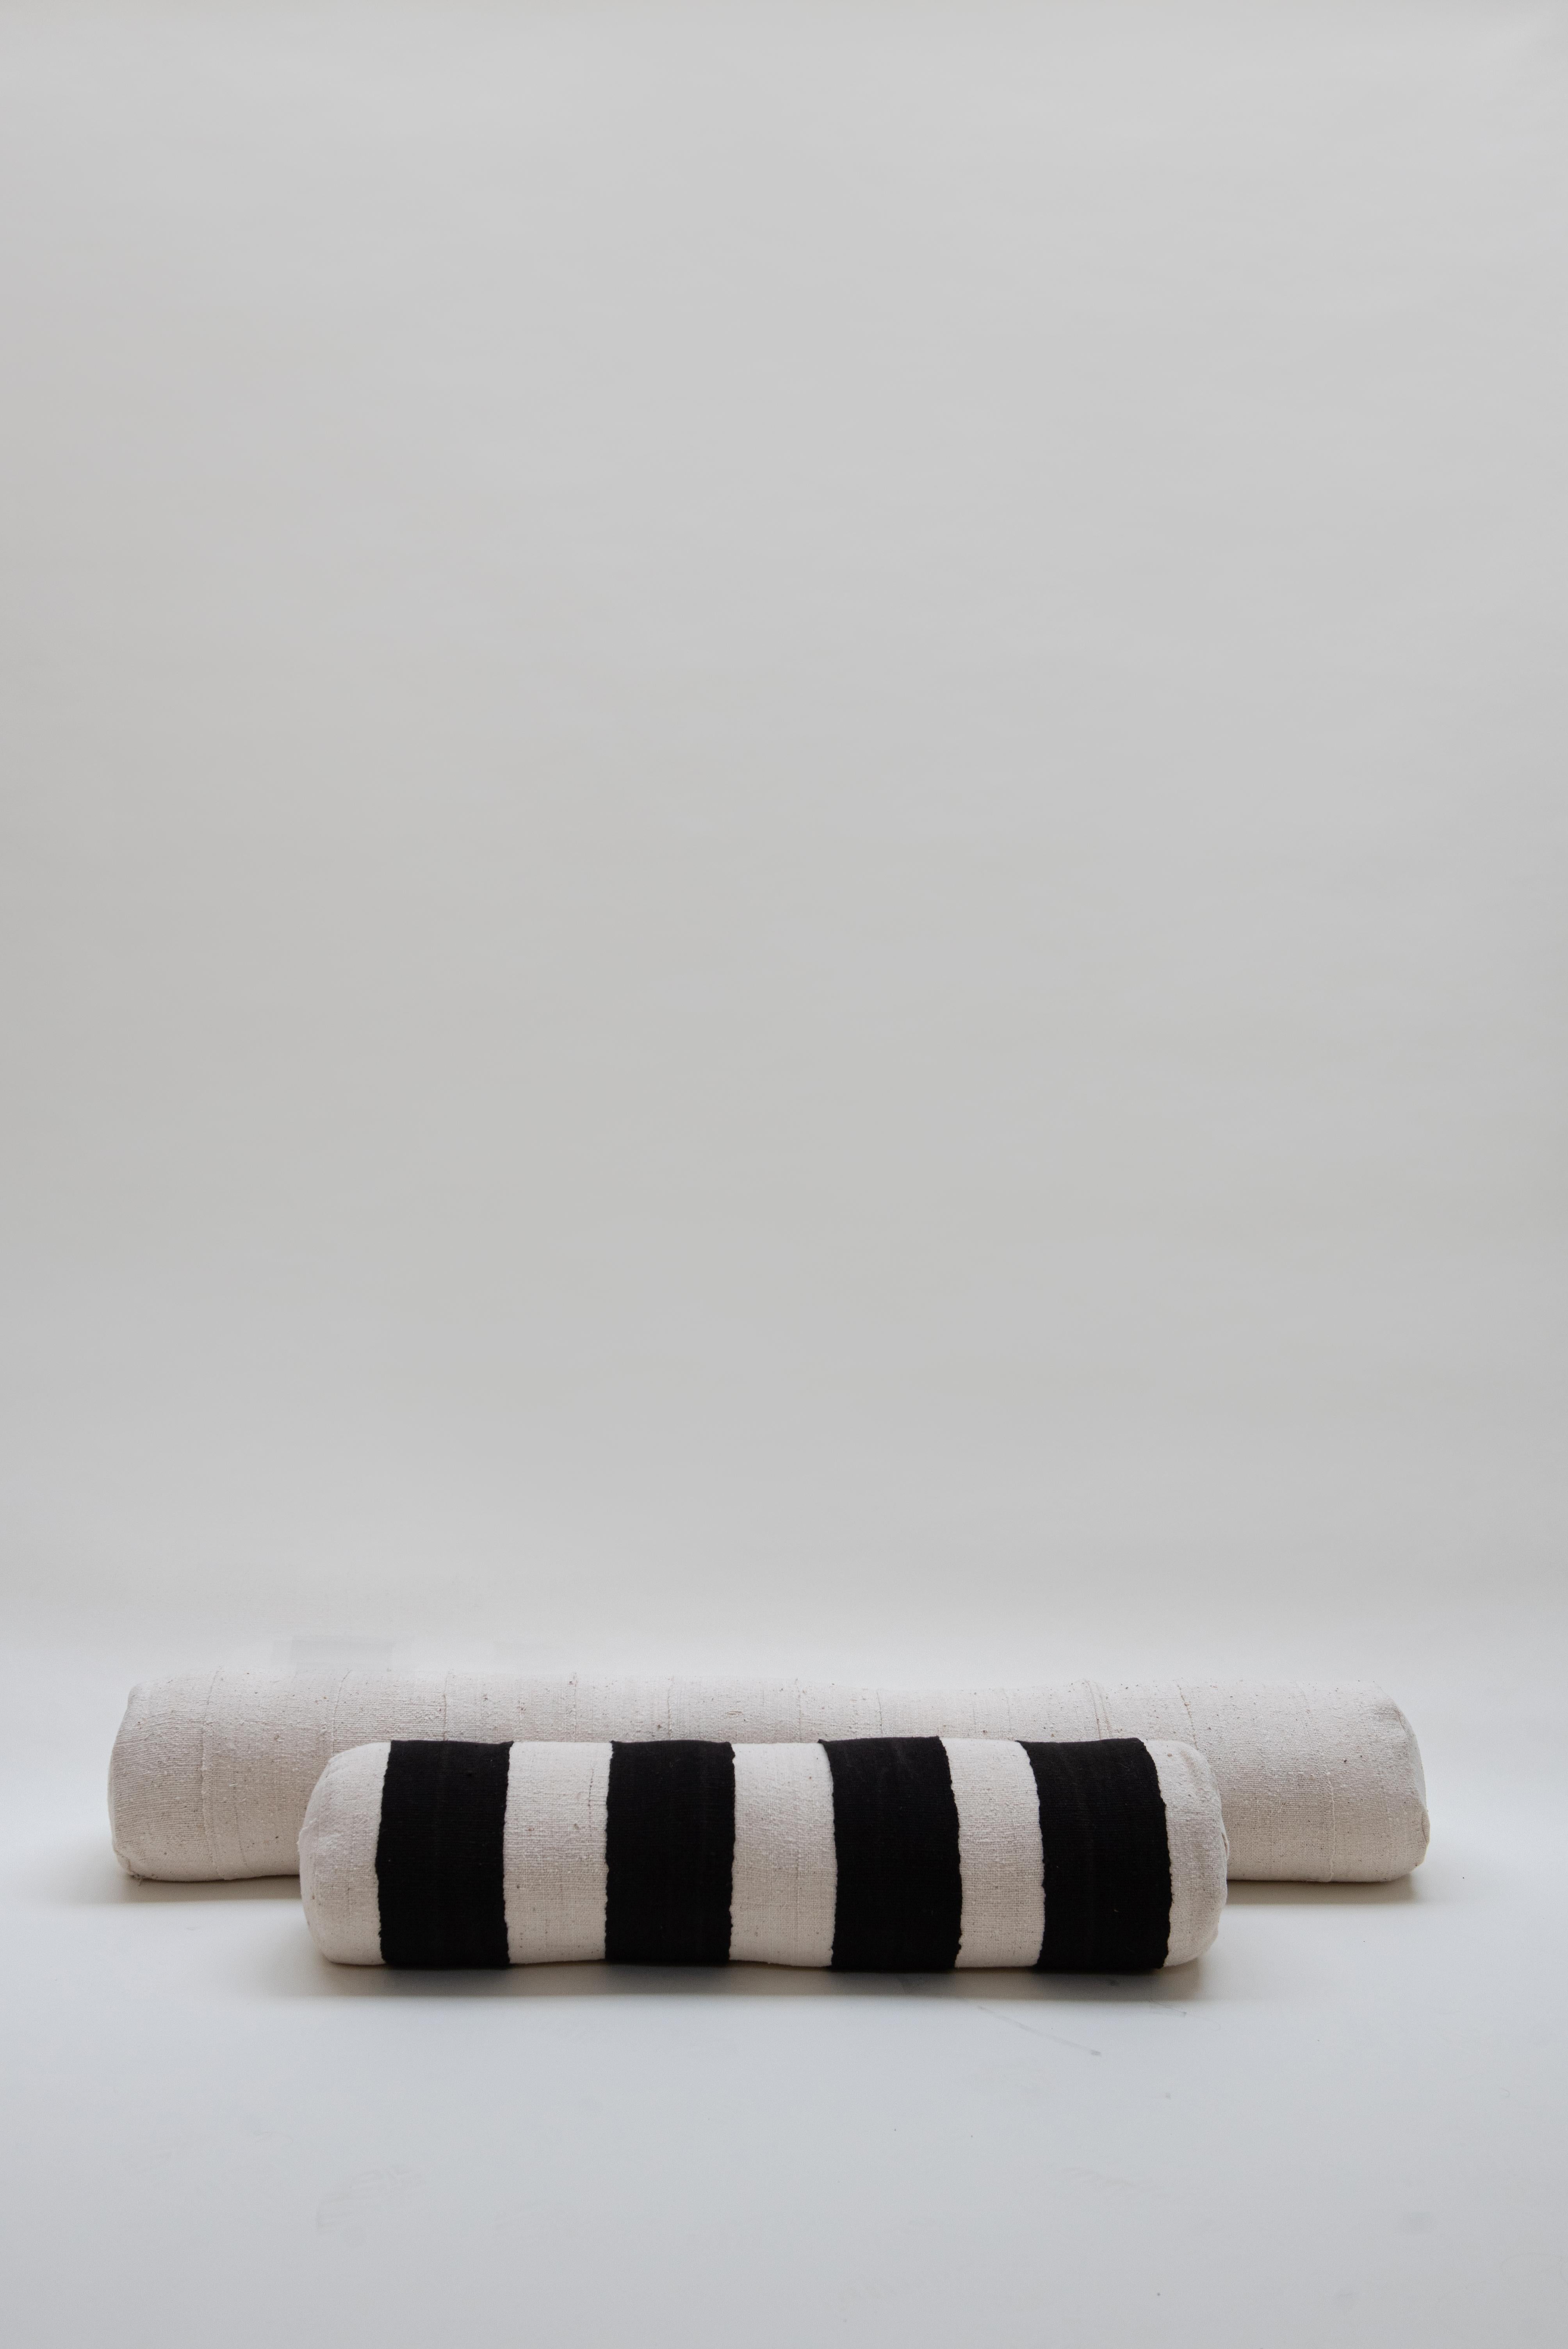 Organic Modern Contemporary White Handwoven Cushion / Bolster for on Your Bed or Sofa For Sale